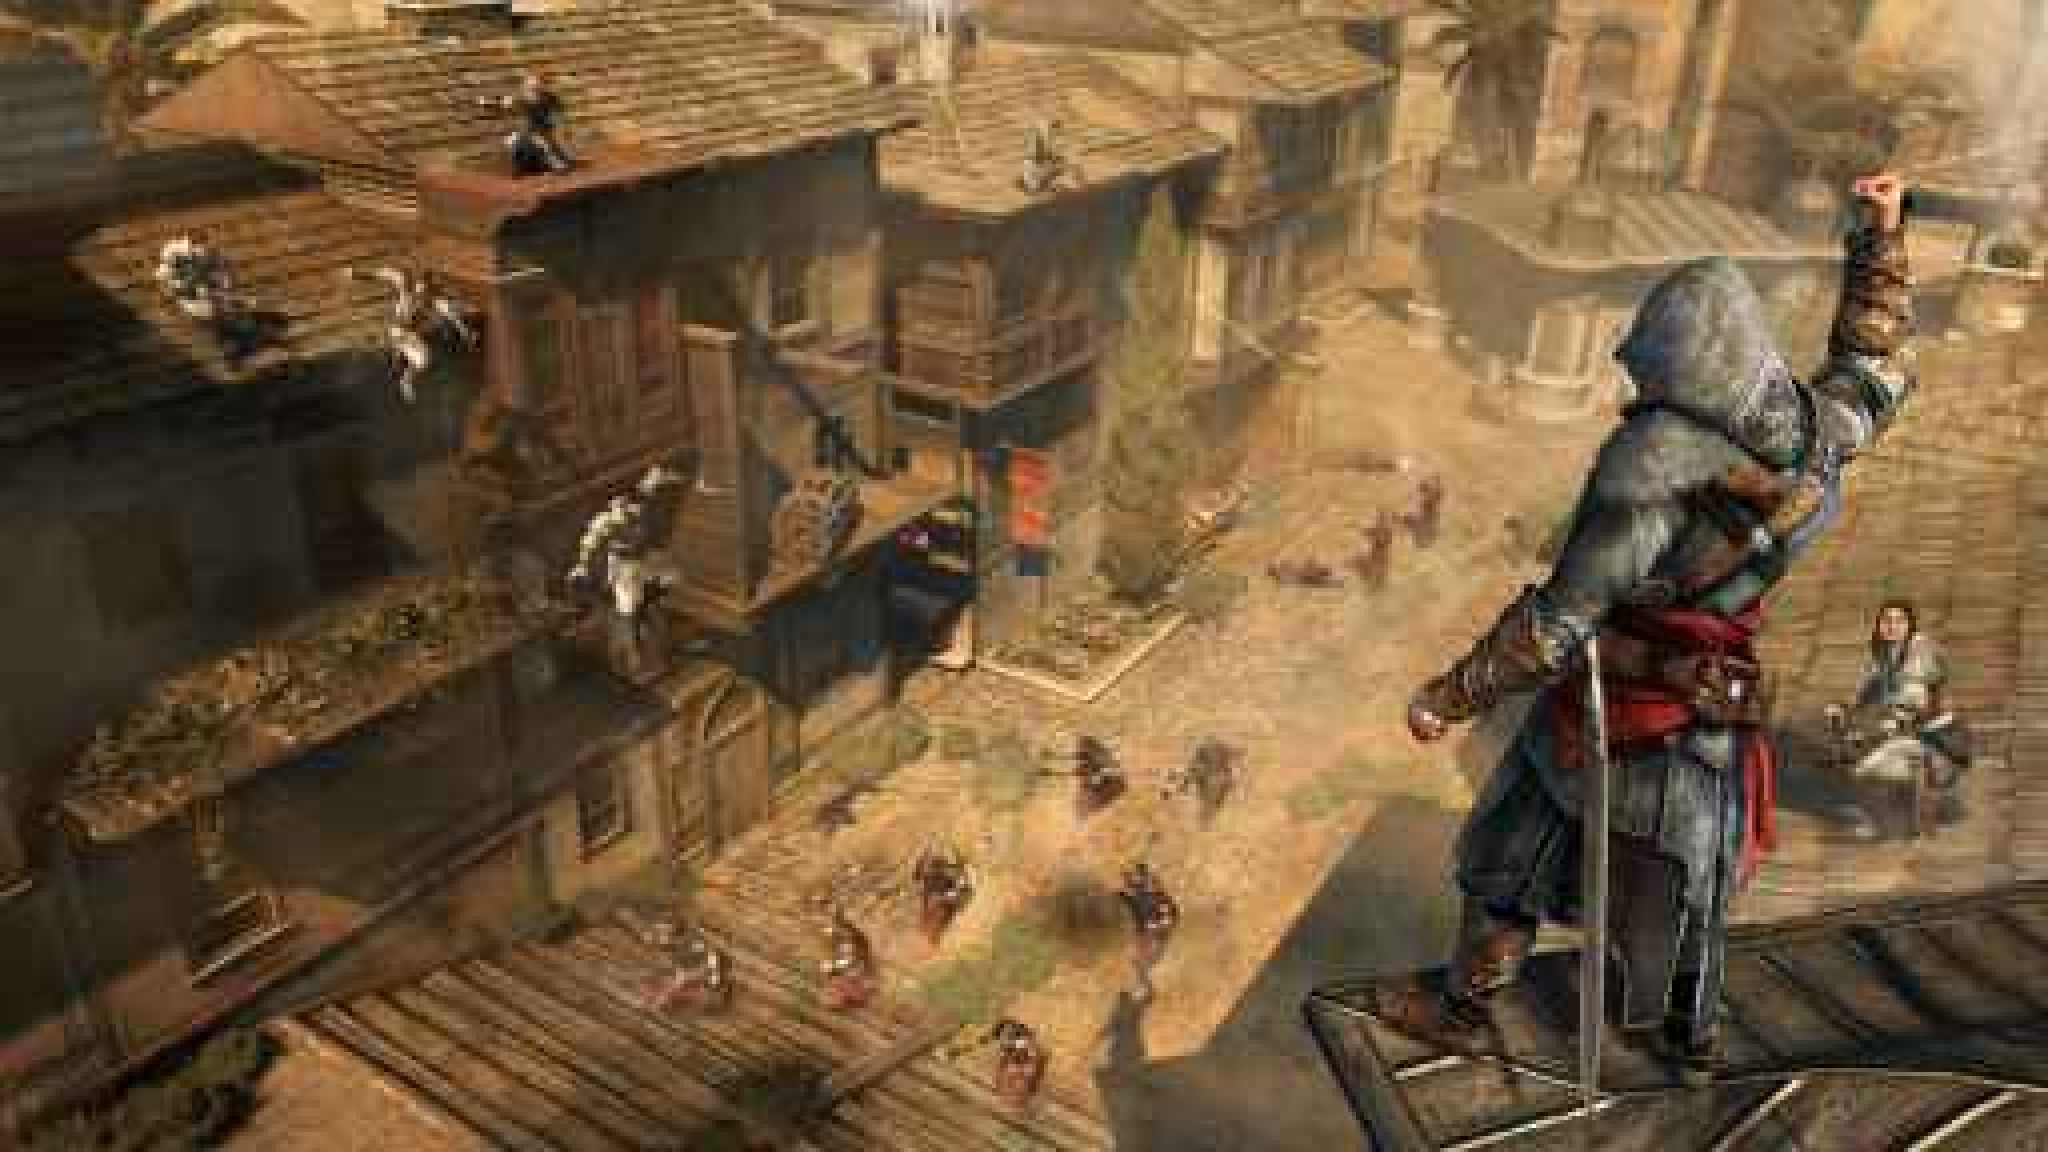 assassin creed revelation download pc